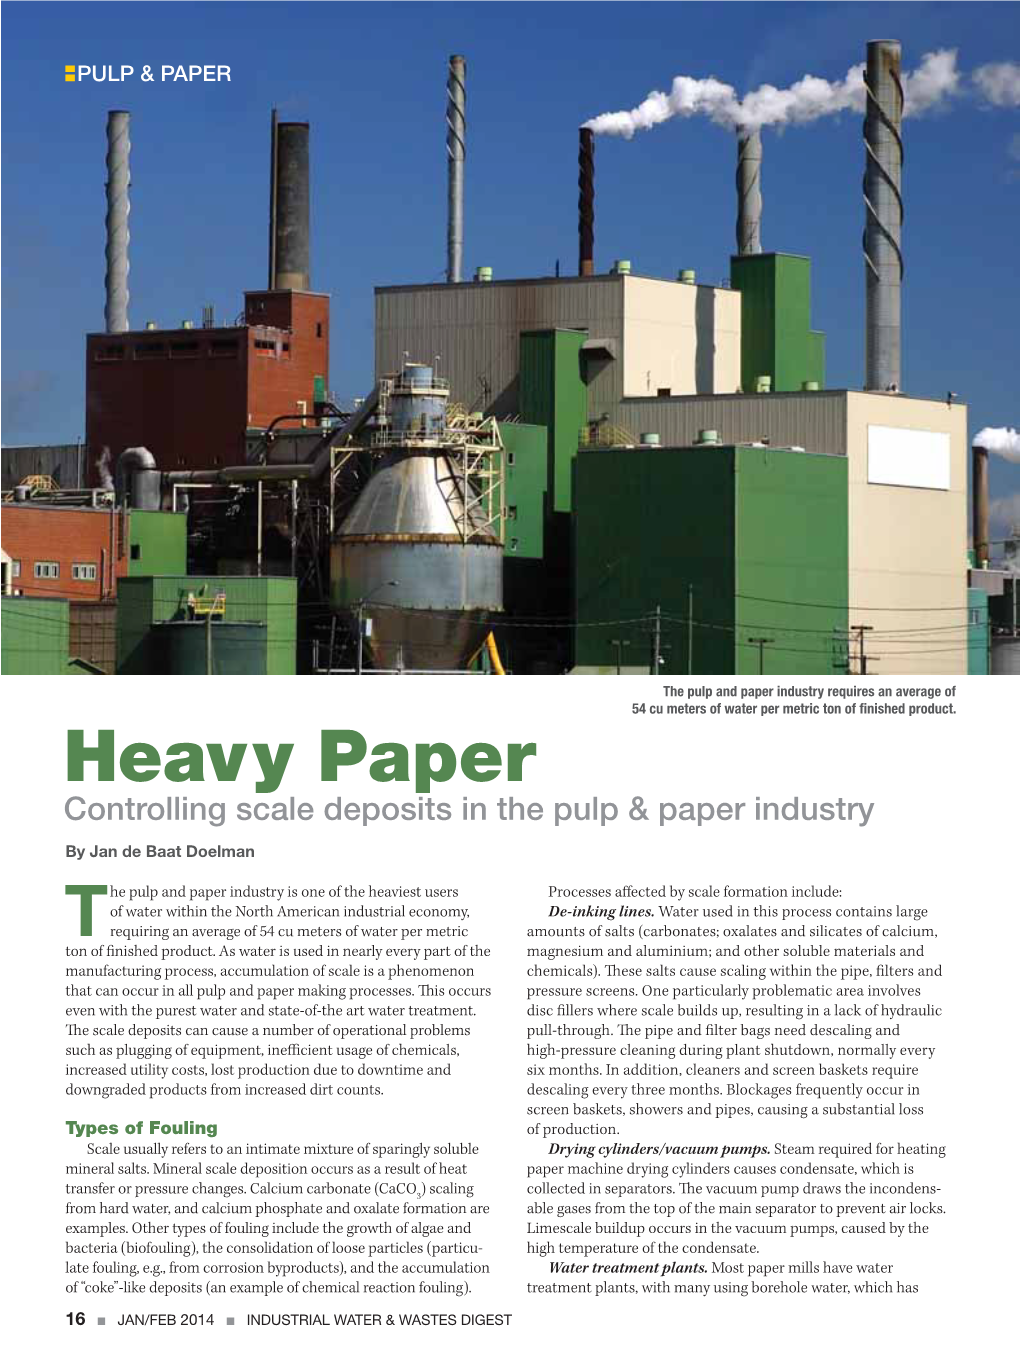 Heavy Paper Controlling Scale Deposits in the Pulp & Paper Industry